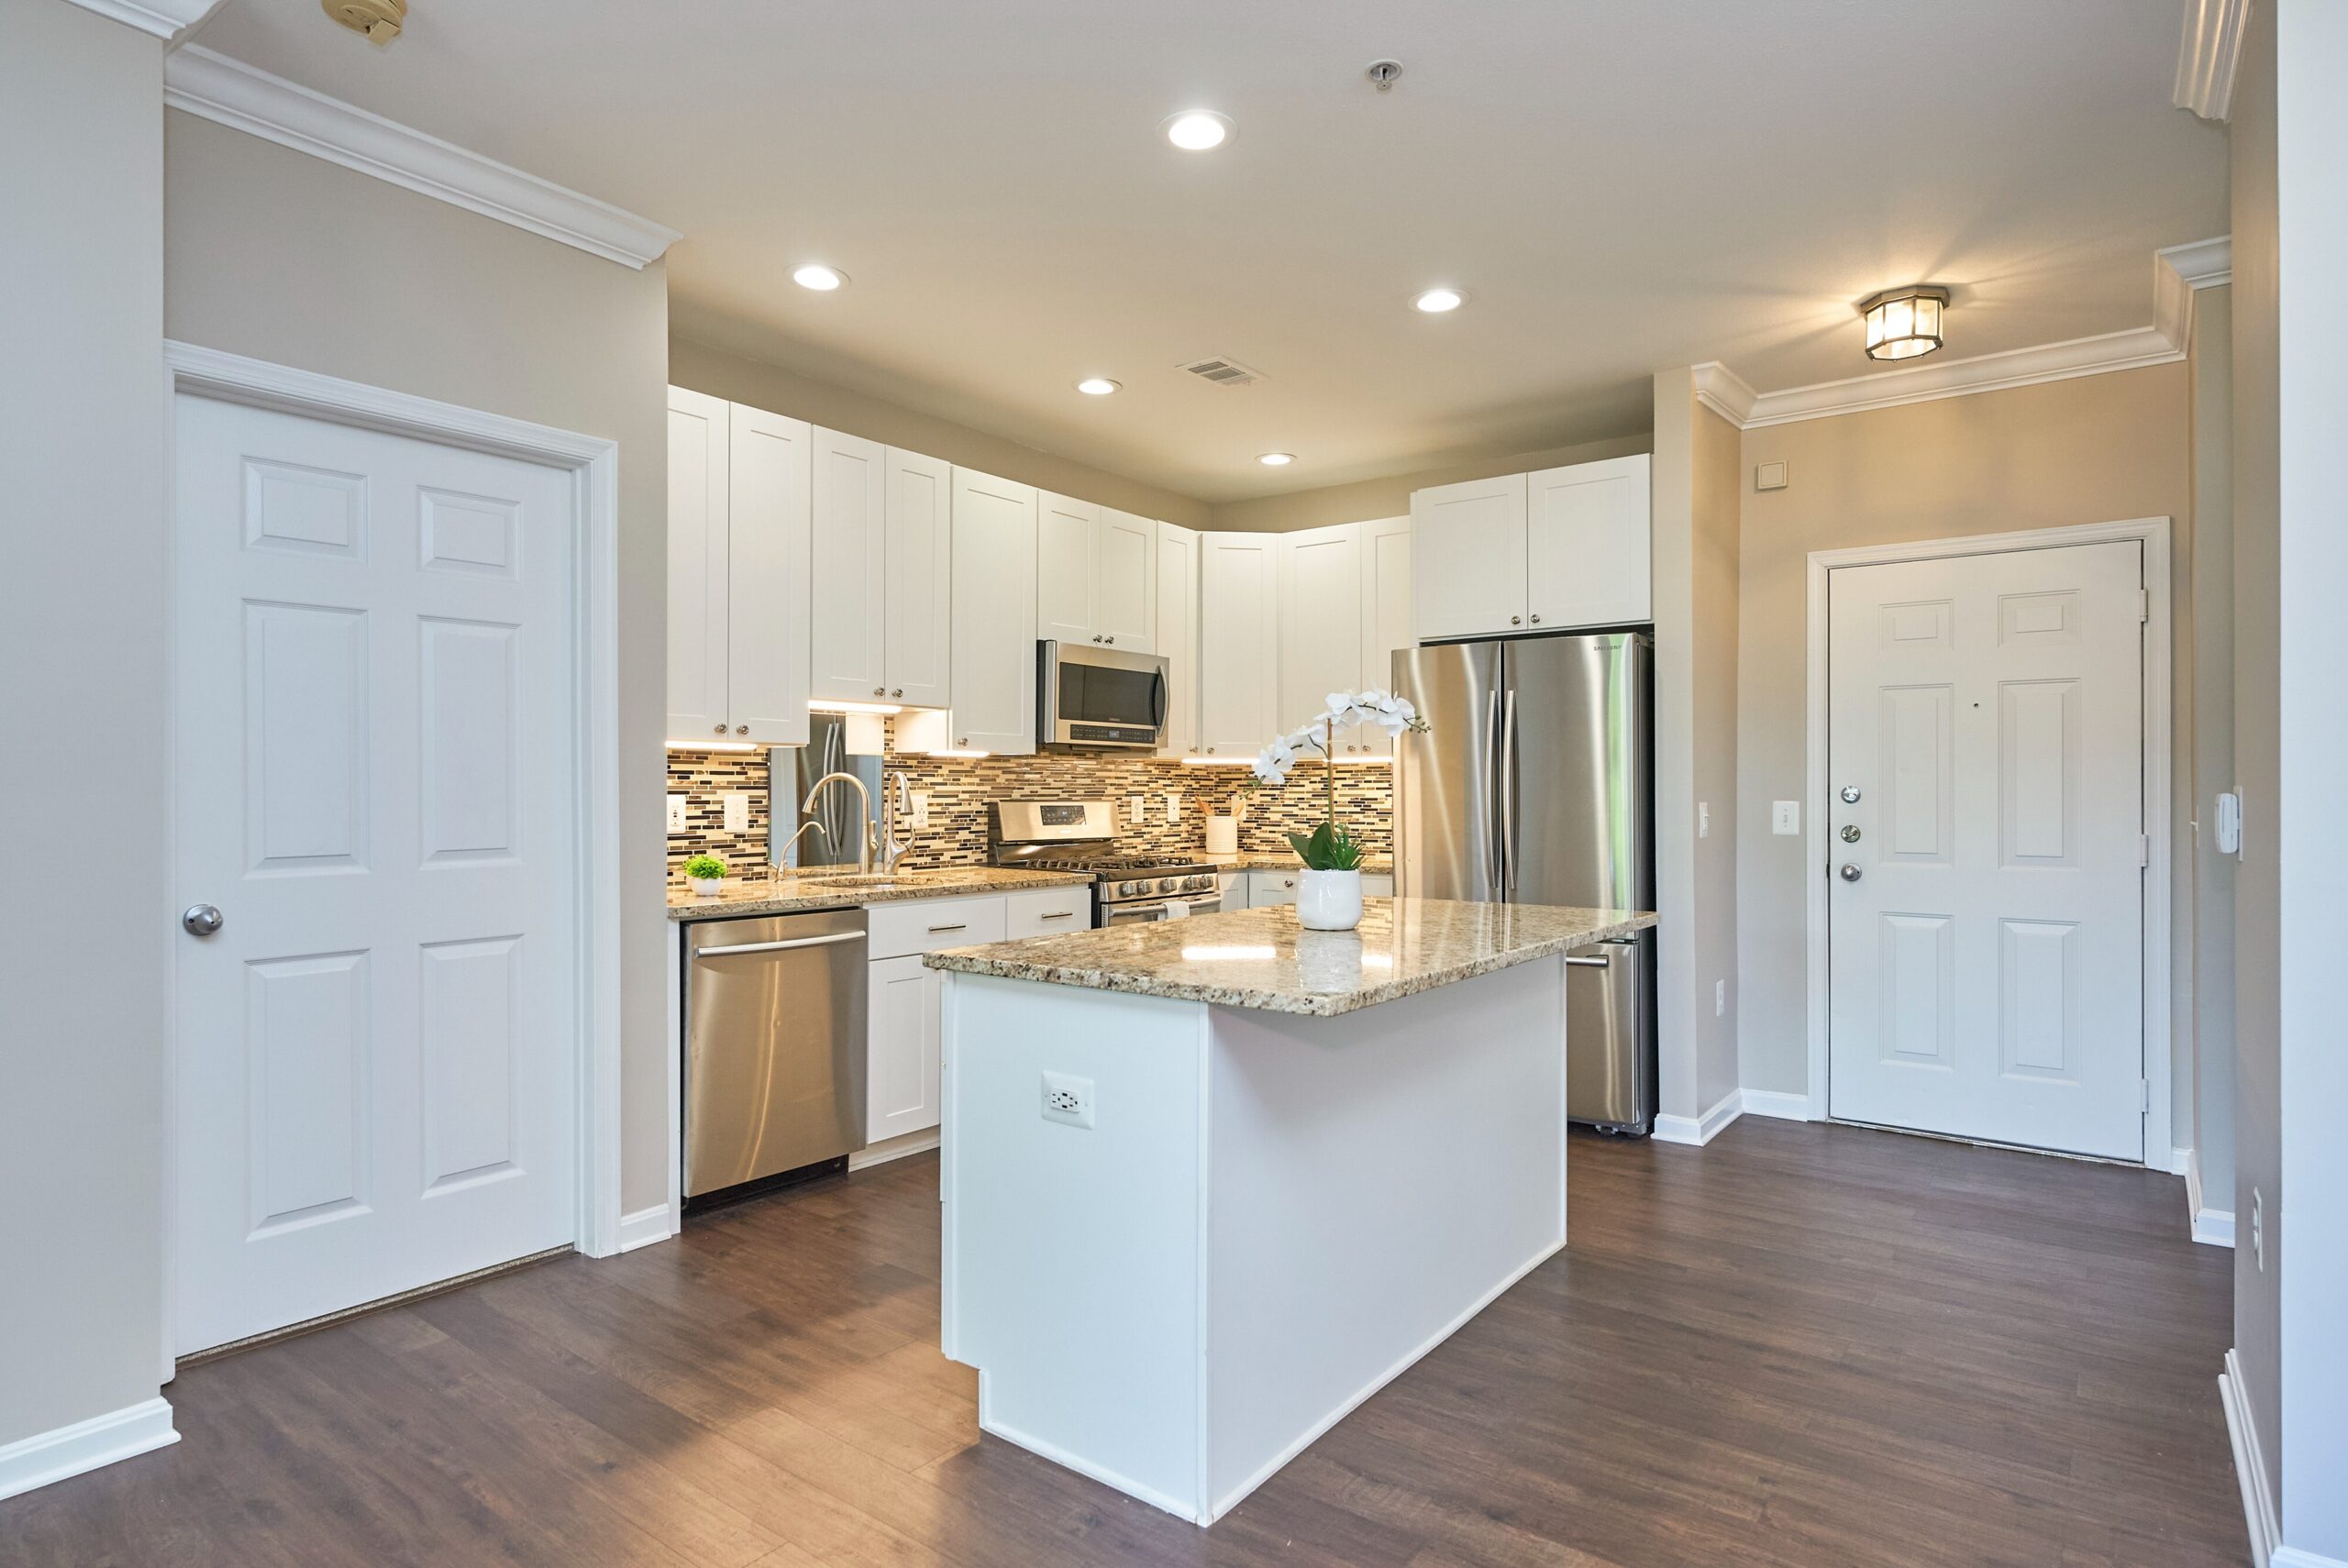 Open kitchen in luxury condo with intricate backsplash, stainless steel appliances, and a large island